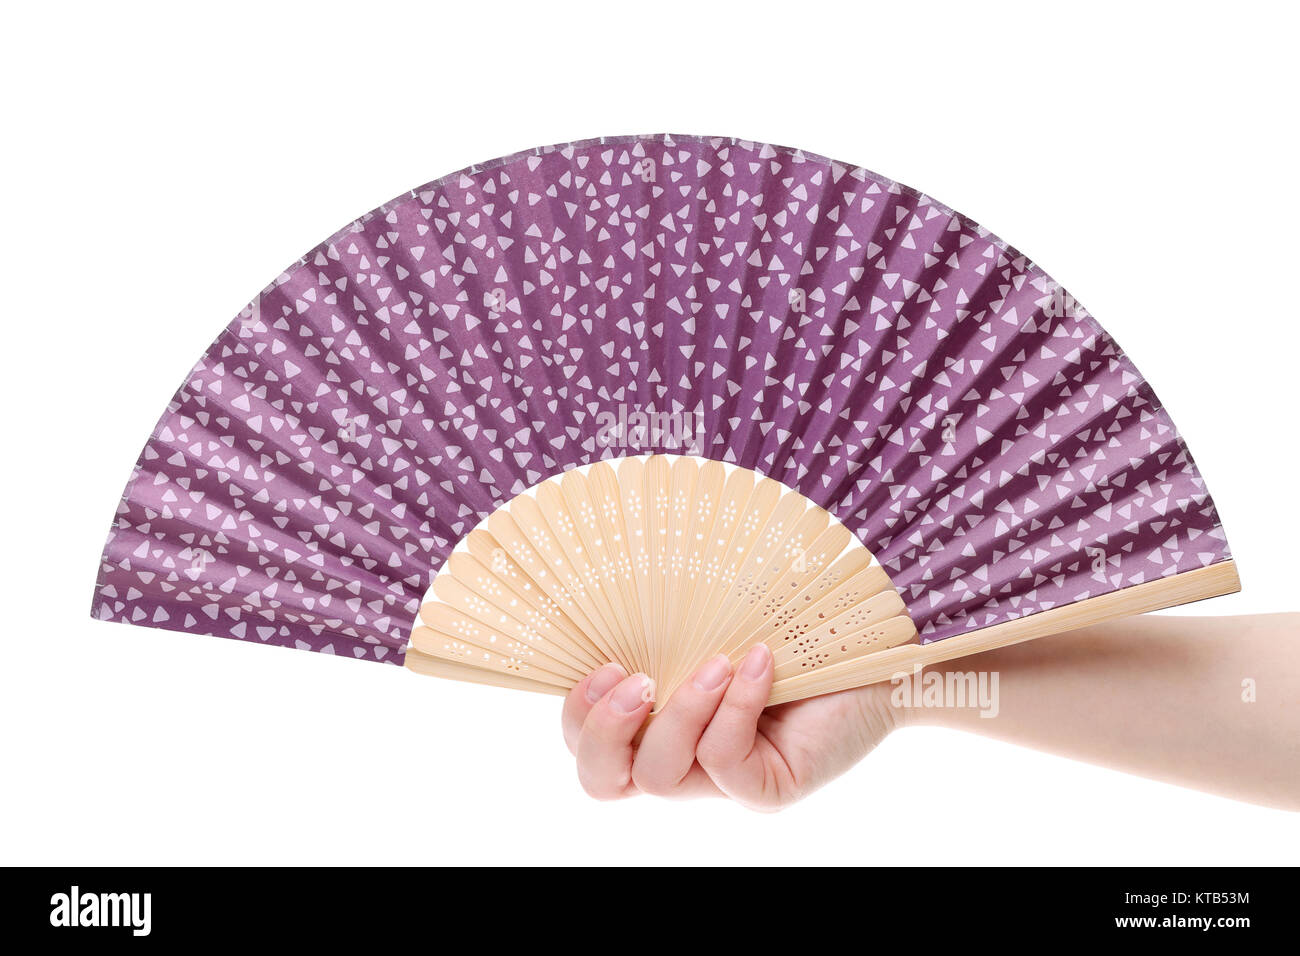 Hand holding chinese fan on a white background Stock Photo - Alamy